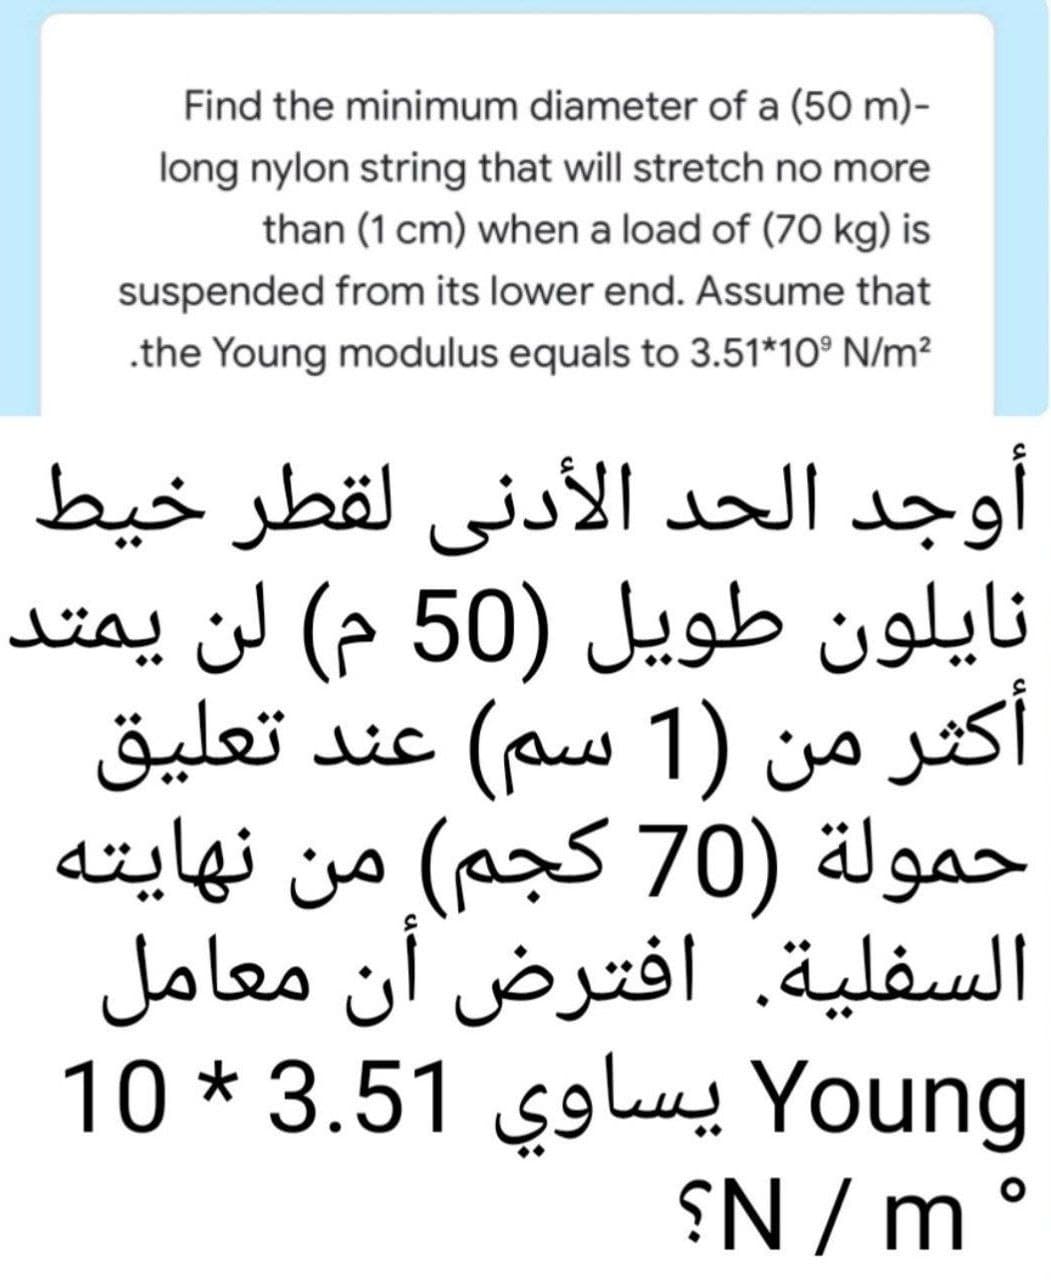 Find the minimum diameter of a (50 m)-
long nylon string that will stretch no more
than (1 cm) when a load of (70 kg) is
suspended from its lower end. Assume that
.the Young modulus equals to 3.51*10° N/m²
أوجد الحد الأدني لقطر خيط
نایلون طويل )50 م( لن يمتد
أكثر من )1 سم( عند تعلیق
حمولة )70 كجم( من نهايته
السفلية. افترض أن معامل
10 * 3.51 s9lu Young
W / Ns
